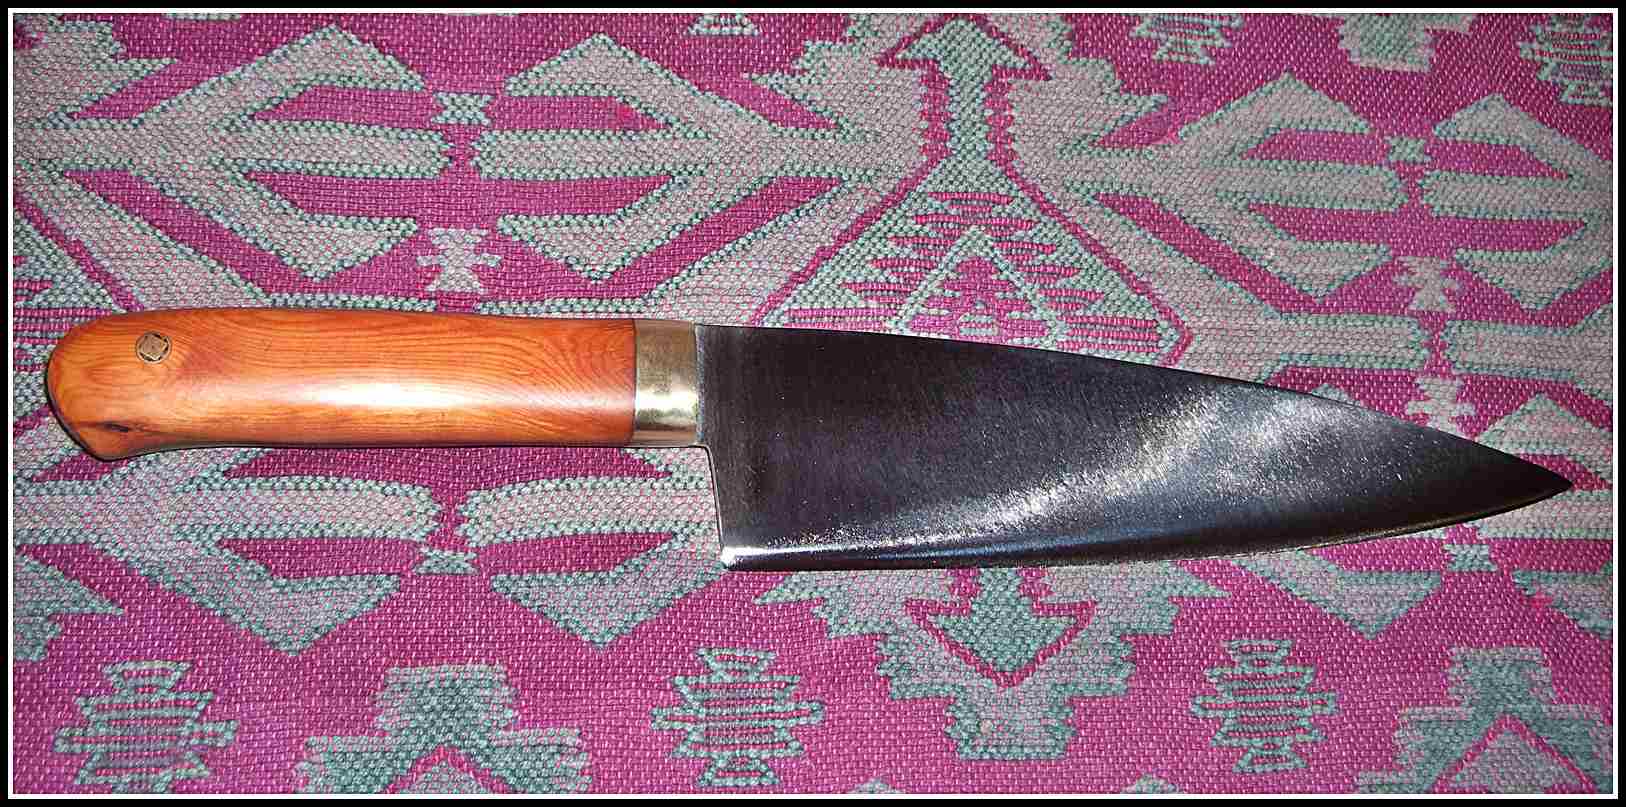 SOLD - 8 inch by 2 inch kitchen knife w/ Yew Wood handle